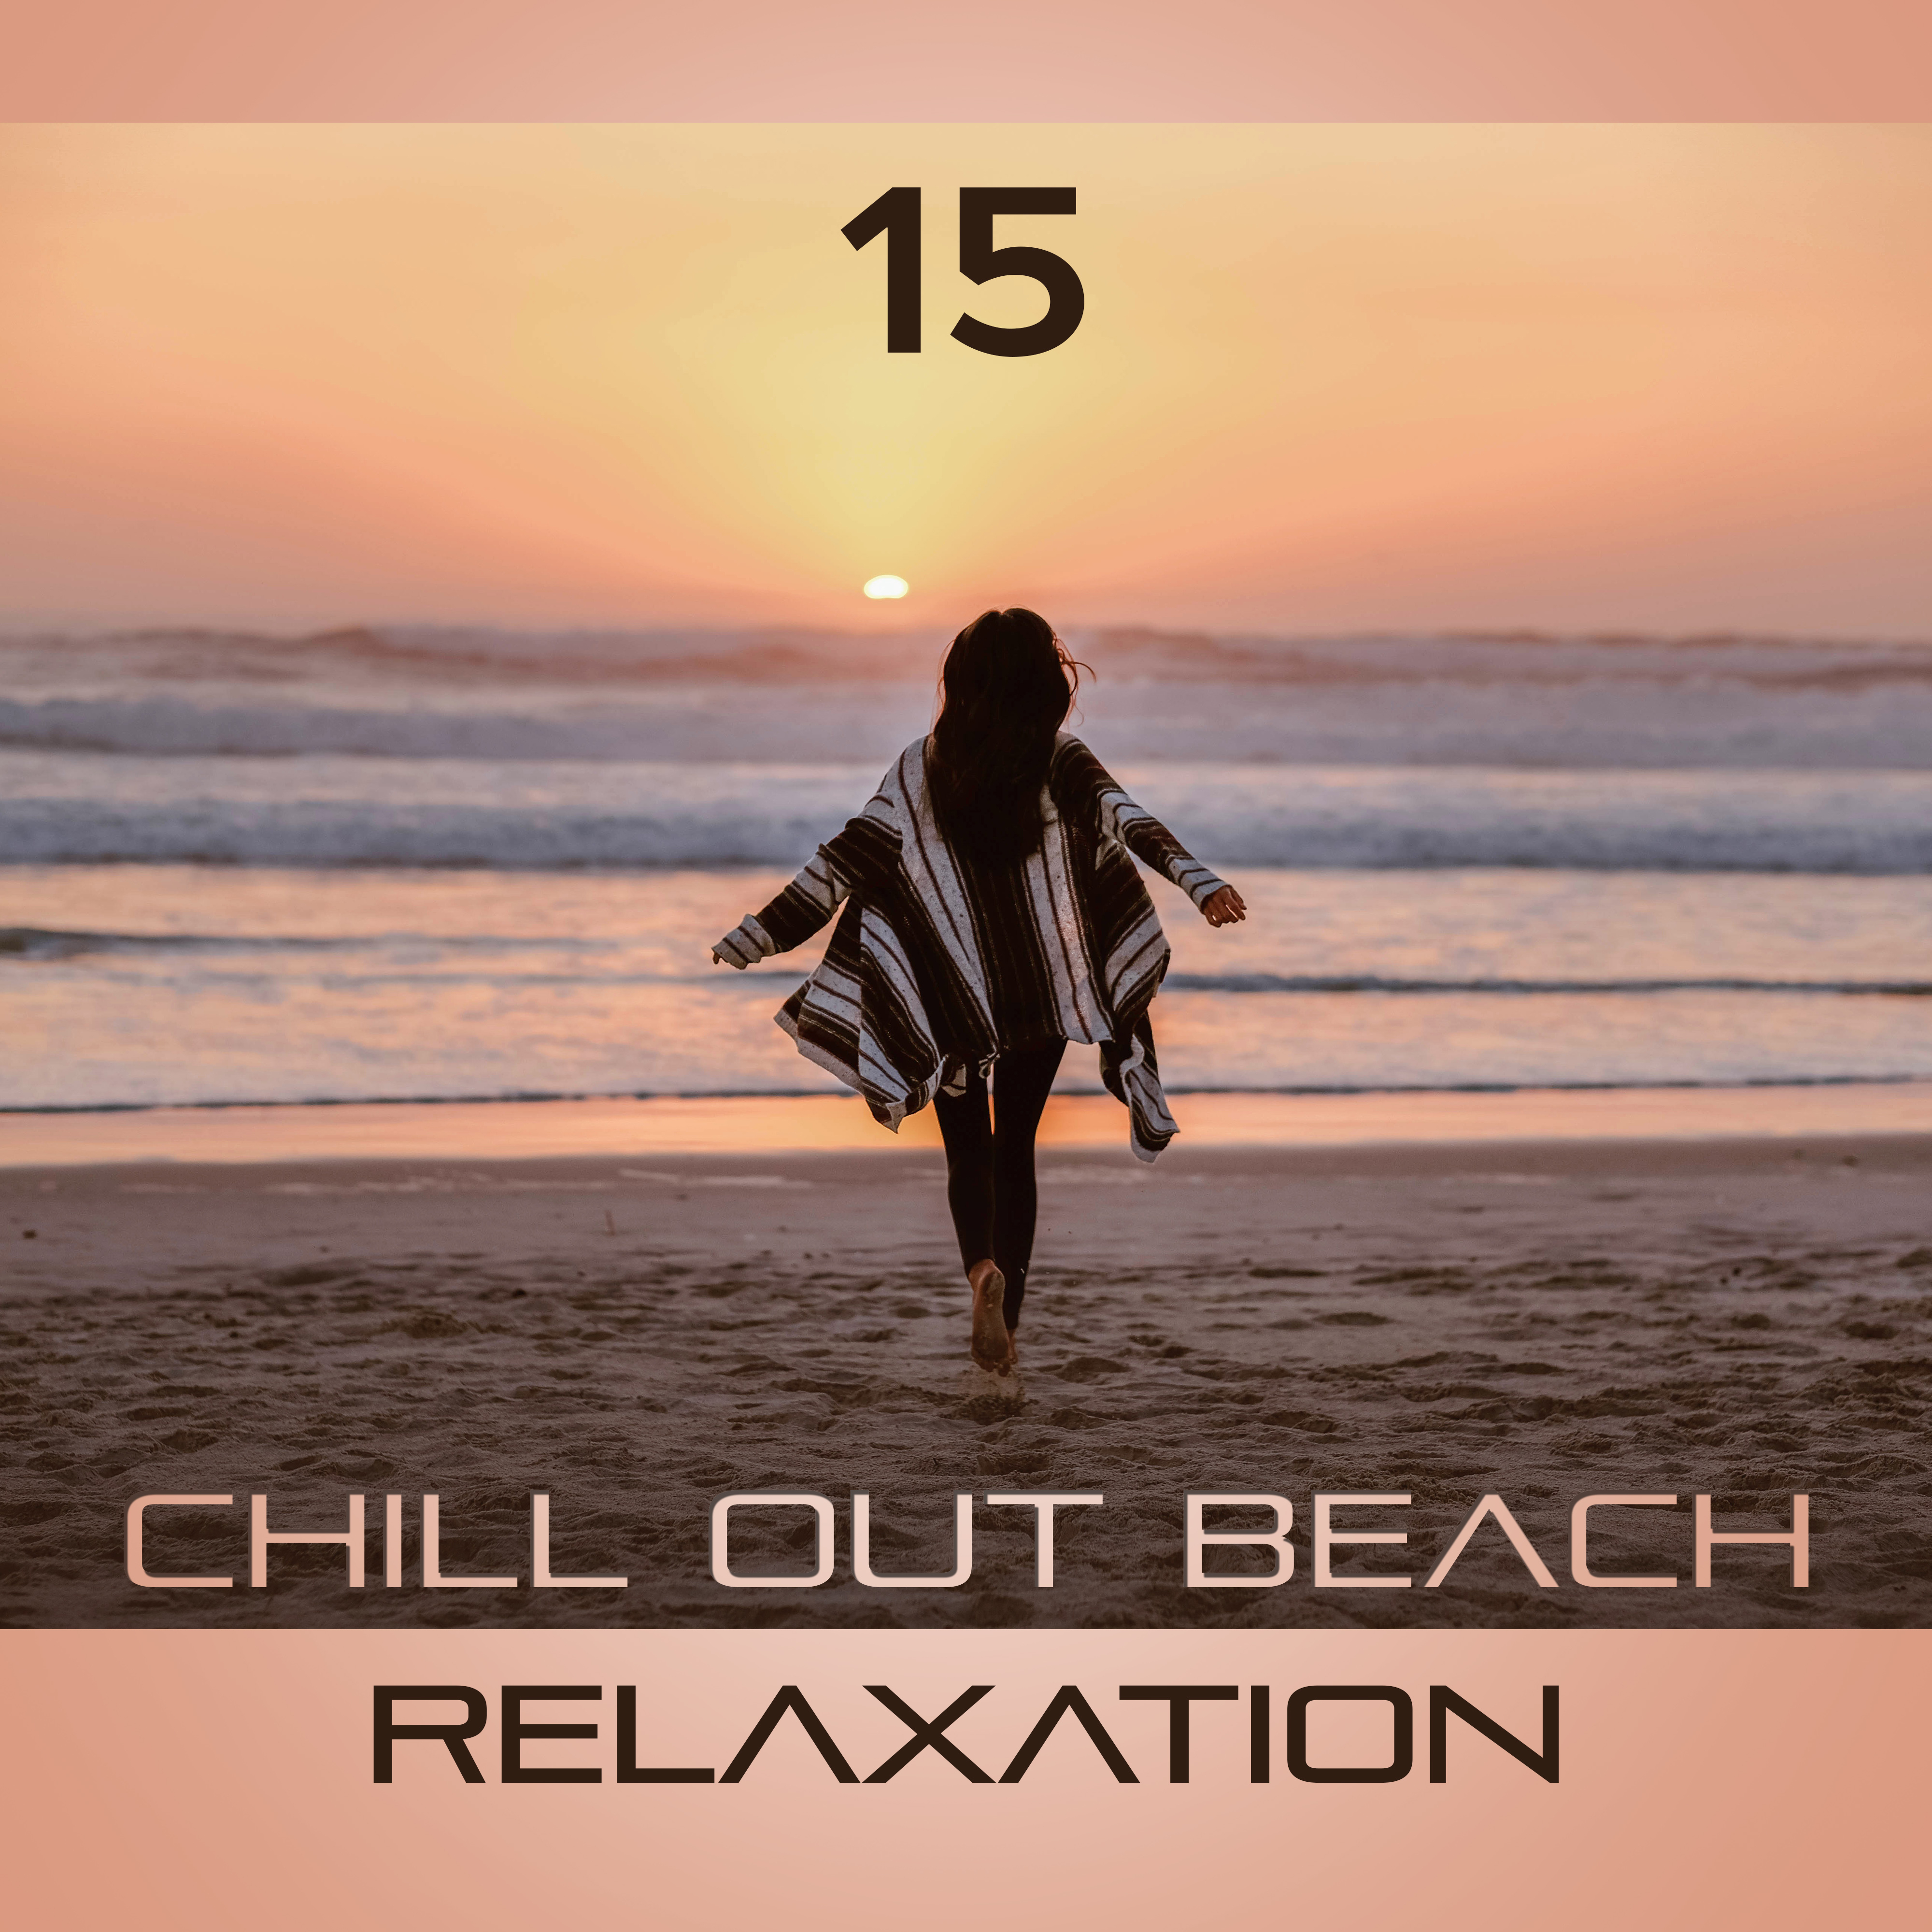 15 Chill Out Beach Relaxation